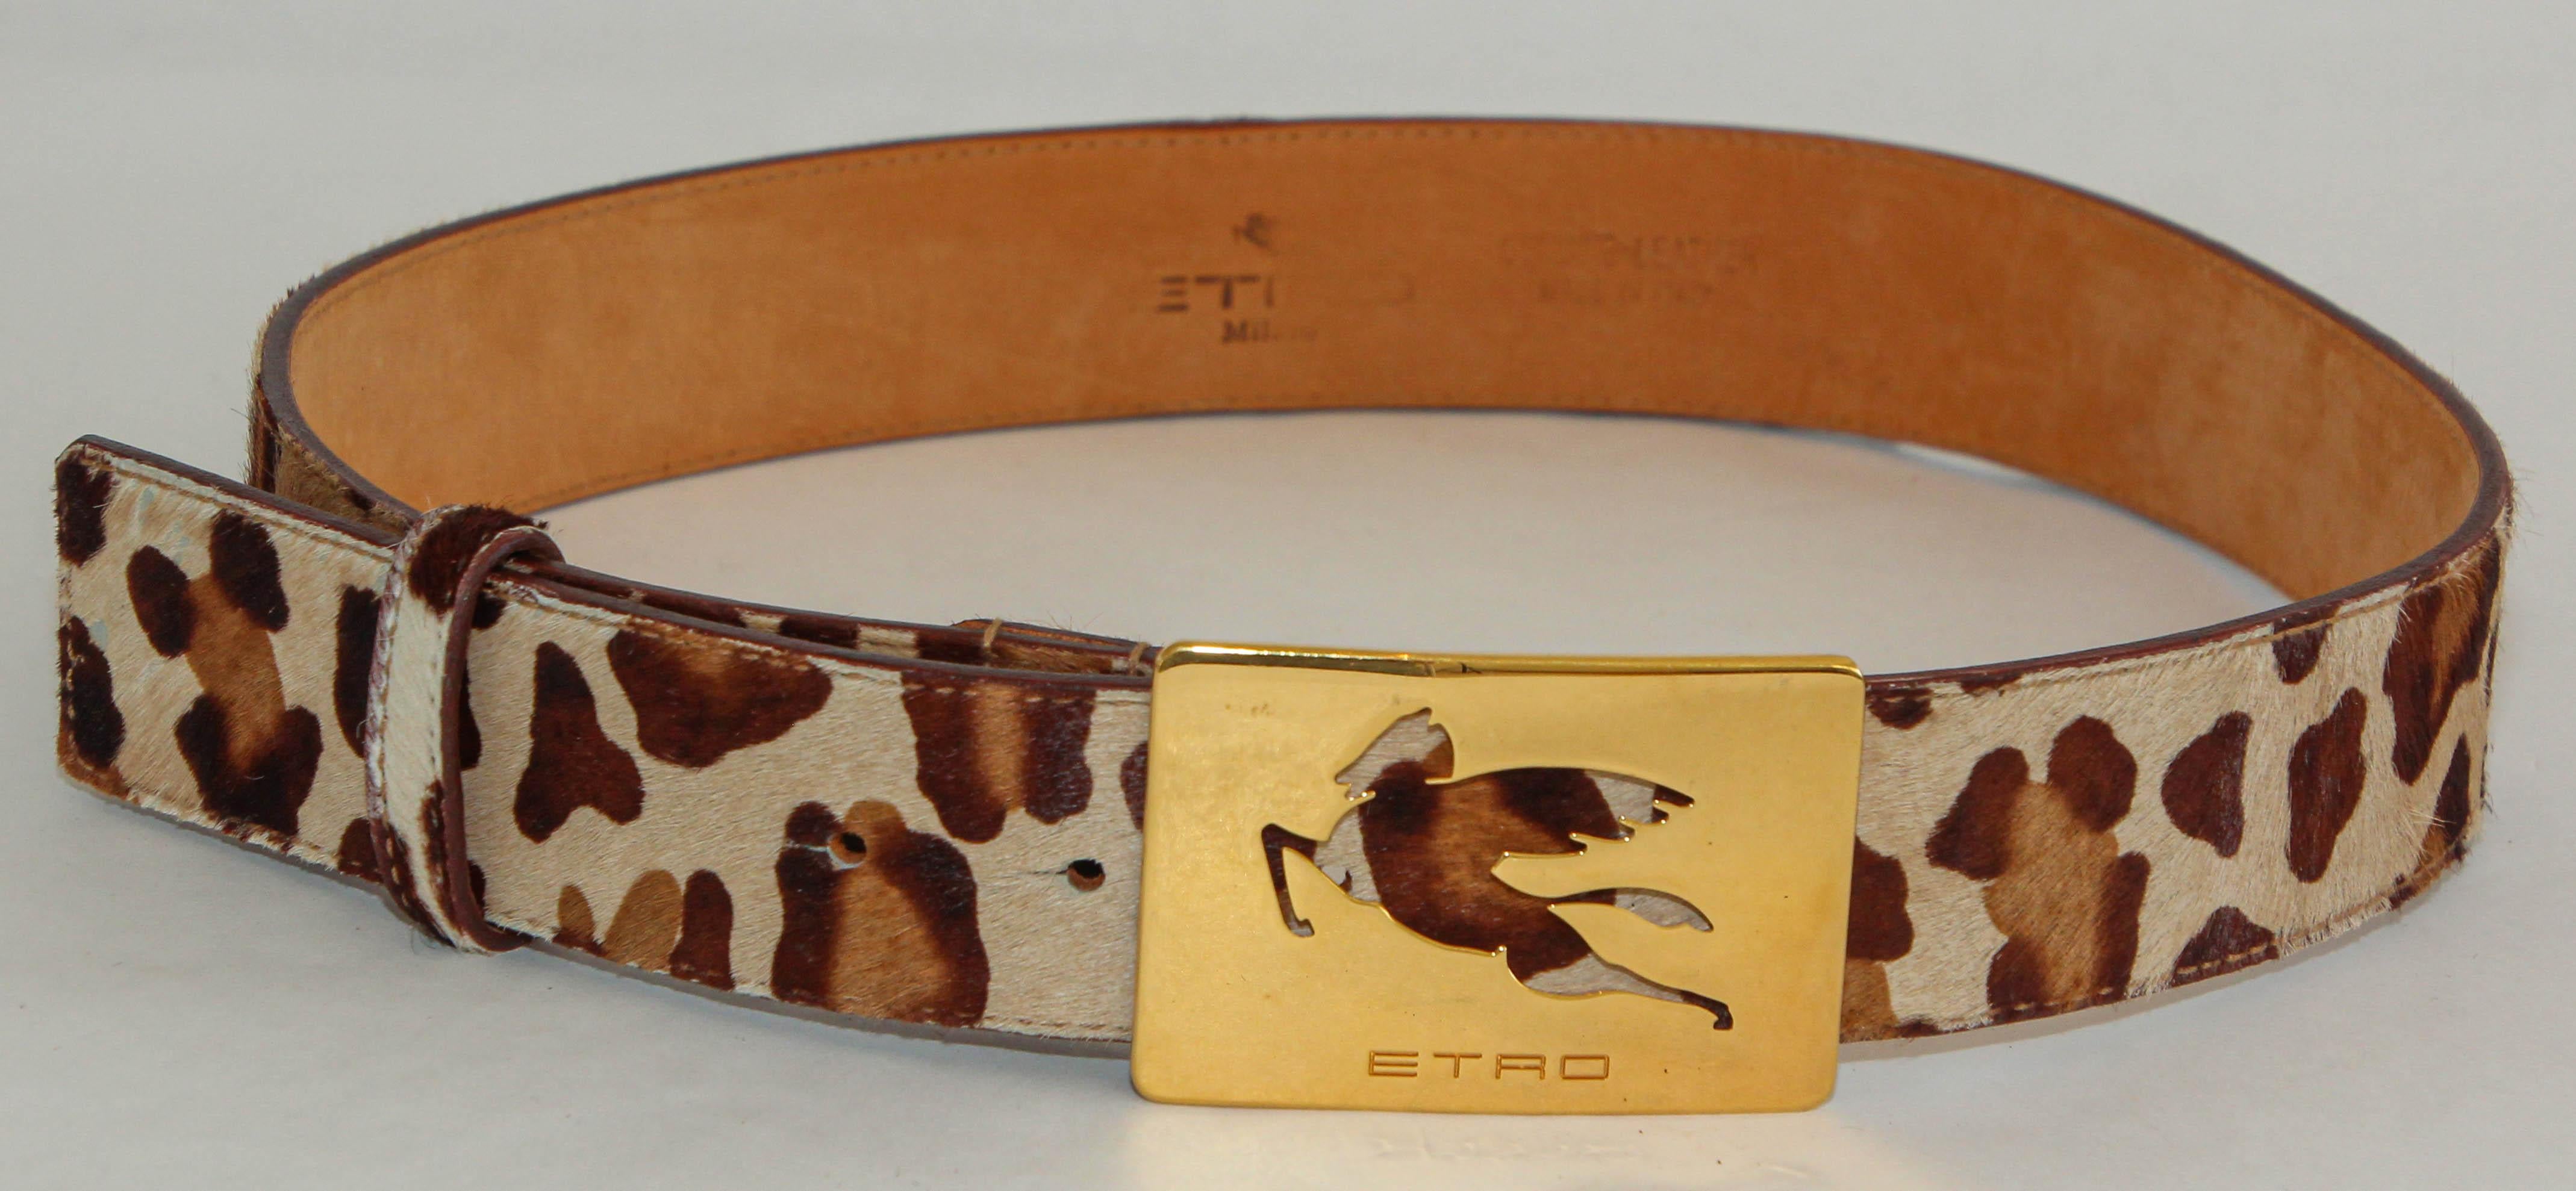 ETRO Leopard-Print Leather Belt with the Iconic Pegaso Brass Buckle For Sale 2